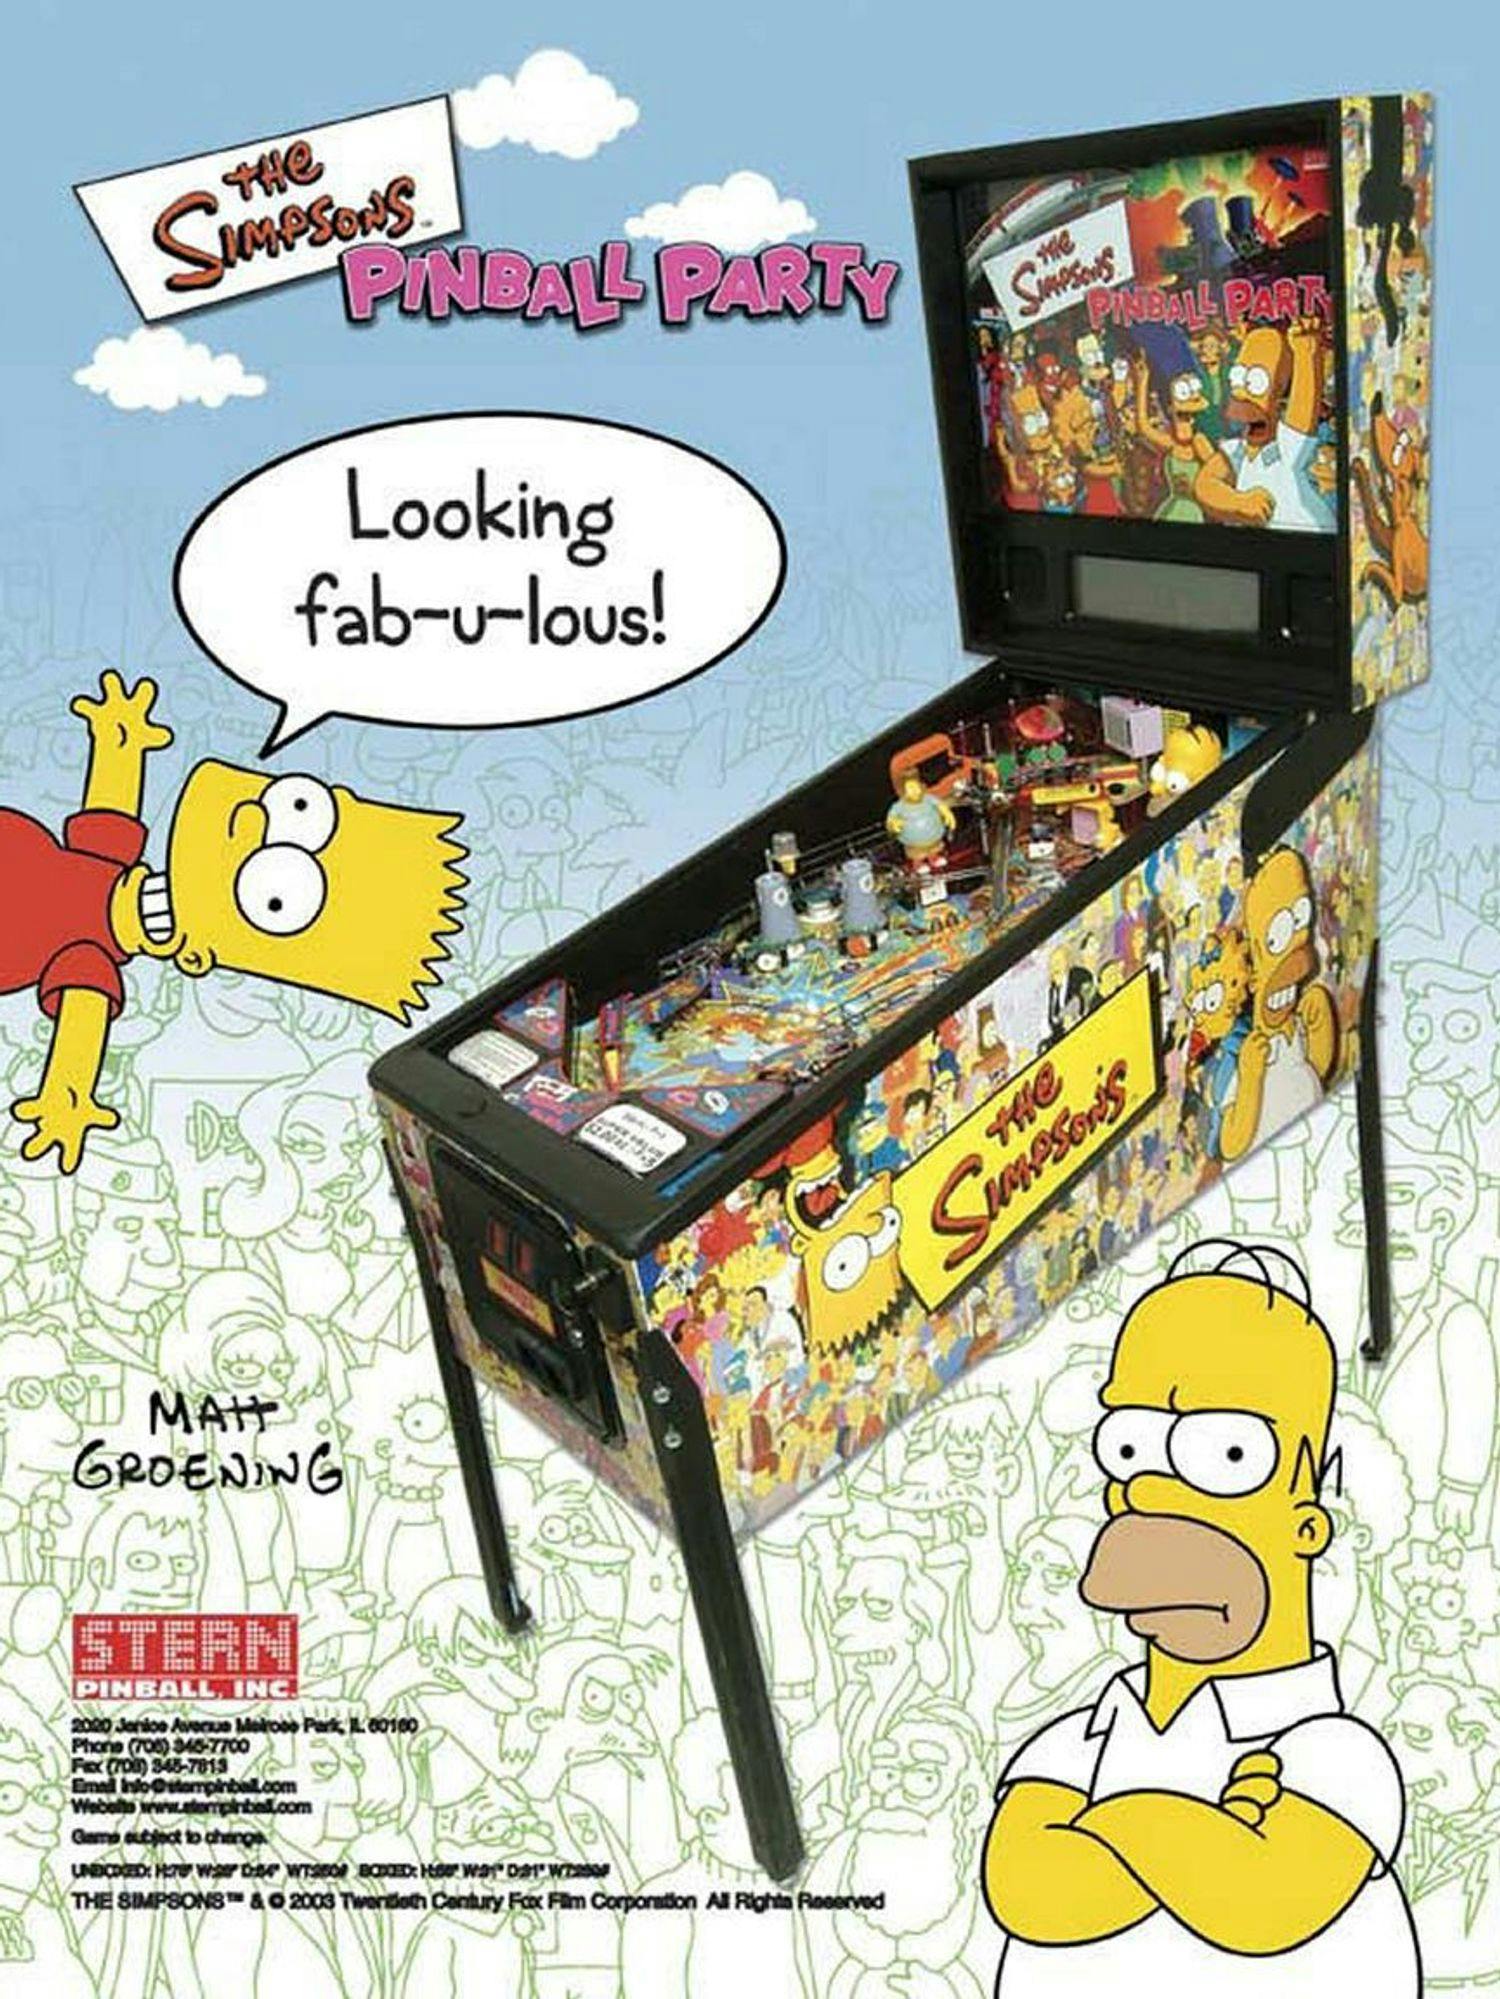 The Simpsons Pinball Party Flyer Vorderseite